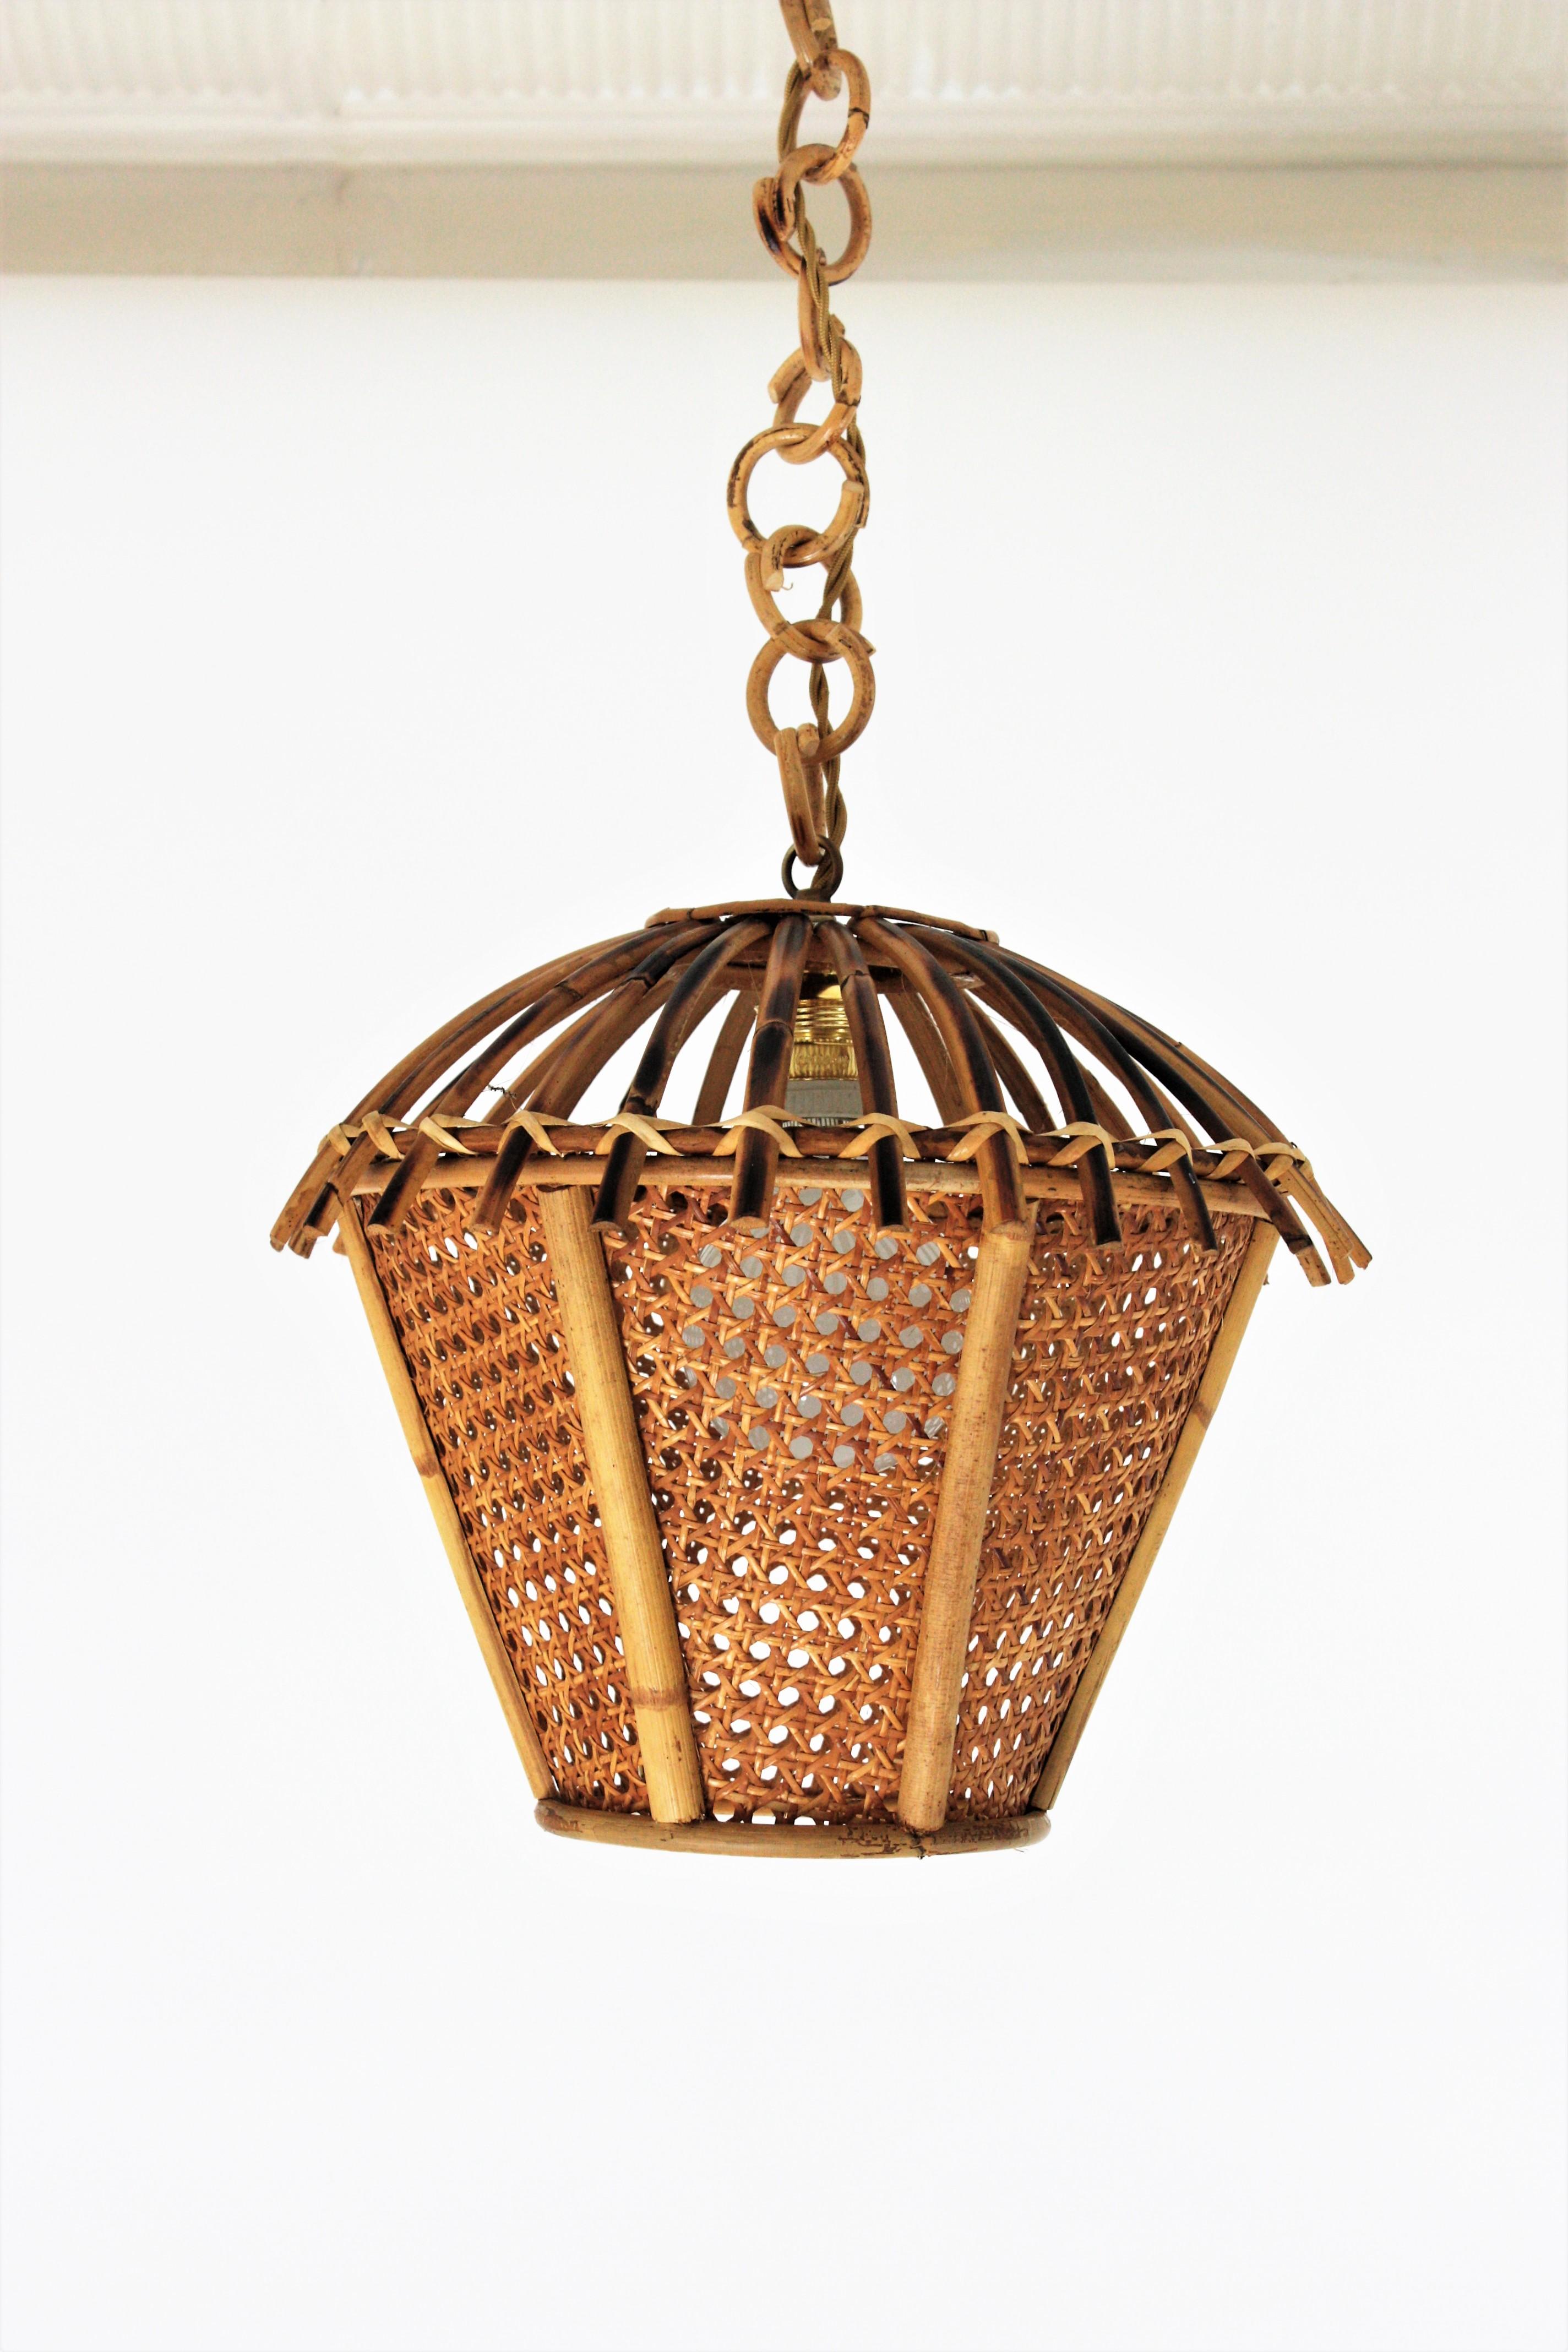 Italian Modernist Rattan and Wicker Wire Pagoda Pendant Hanging Light, 1960s In Good Condition For Sale In Barcelona, ES